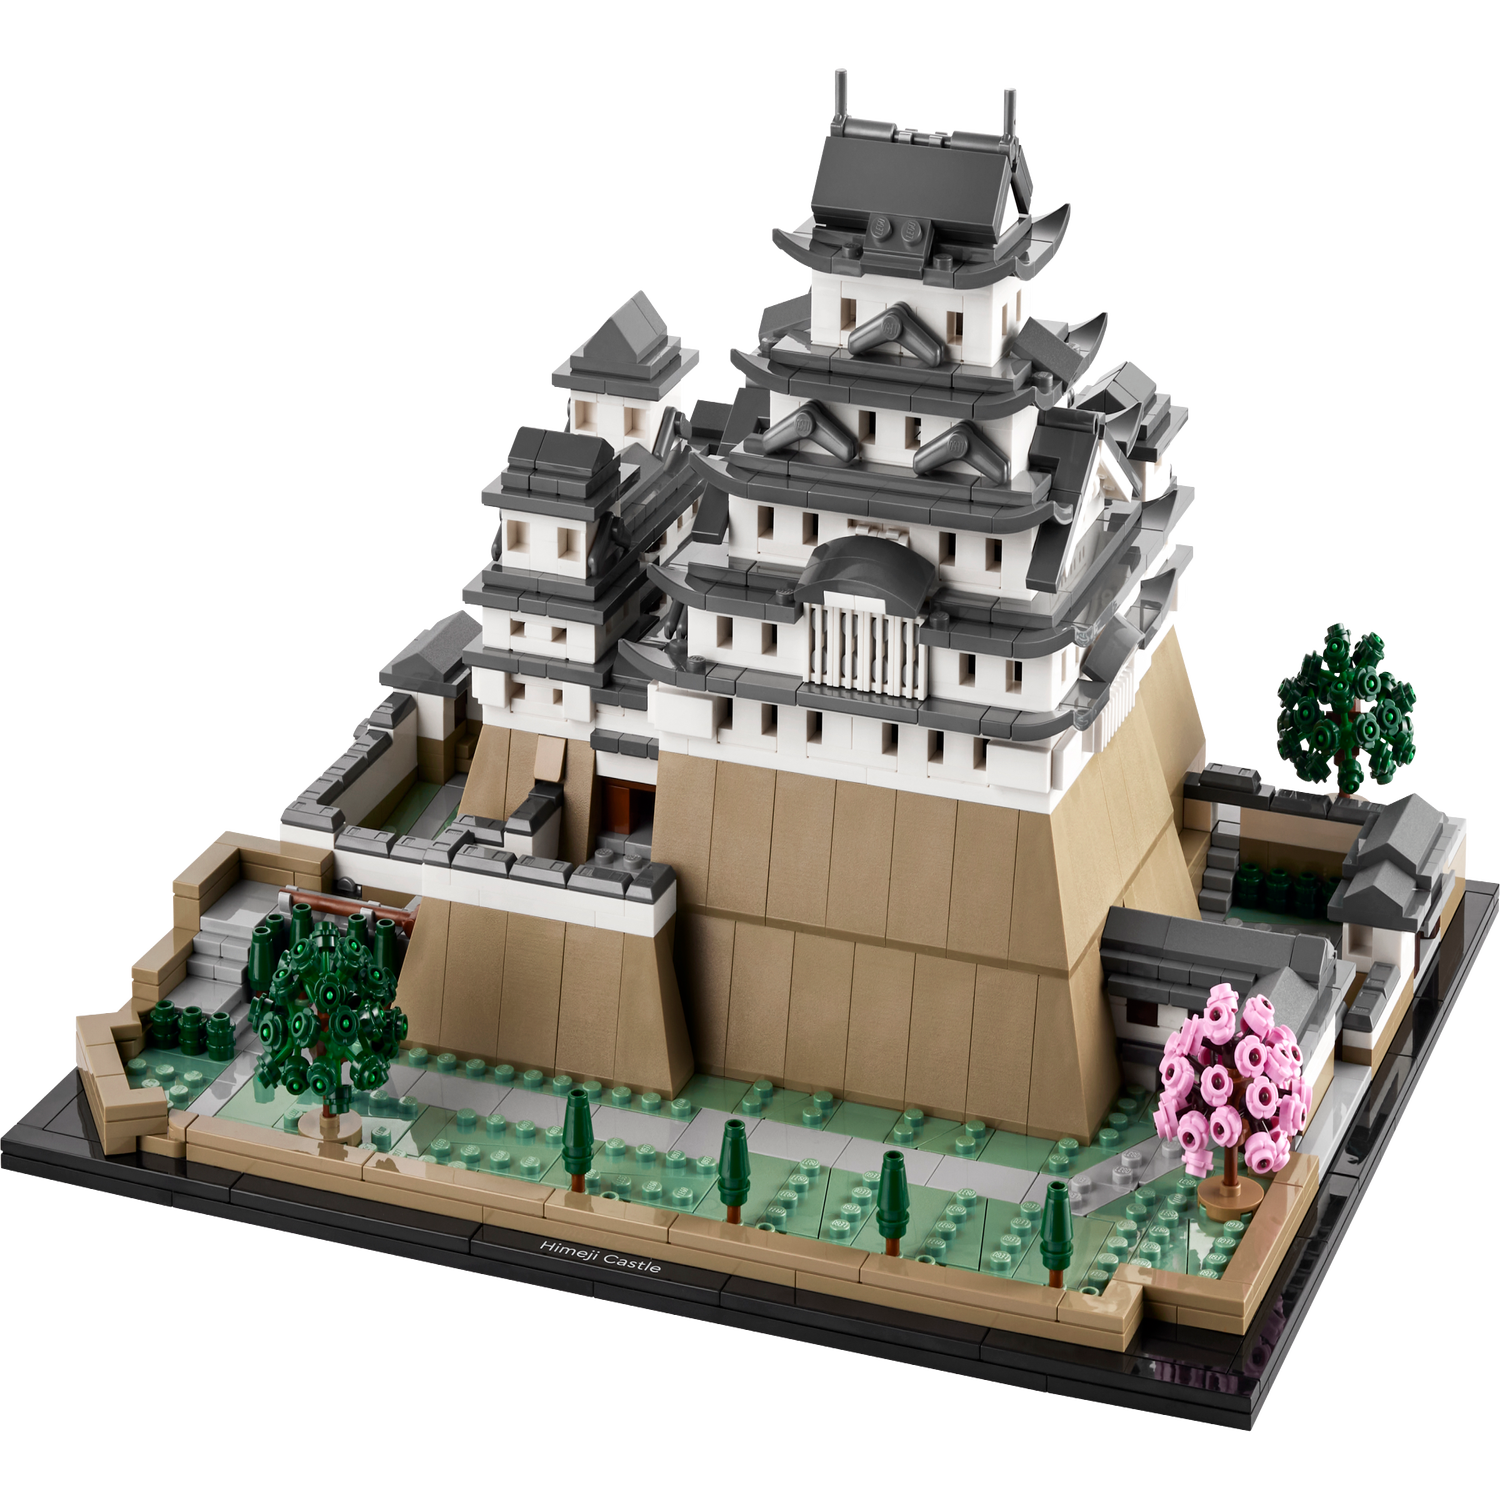 Himeji Castle to be immortalized in Lego; global sales from Aug. 1